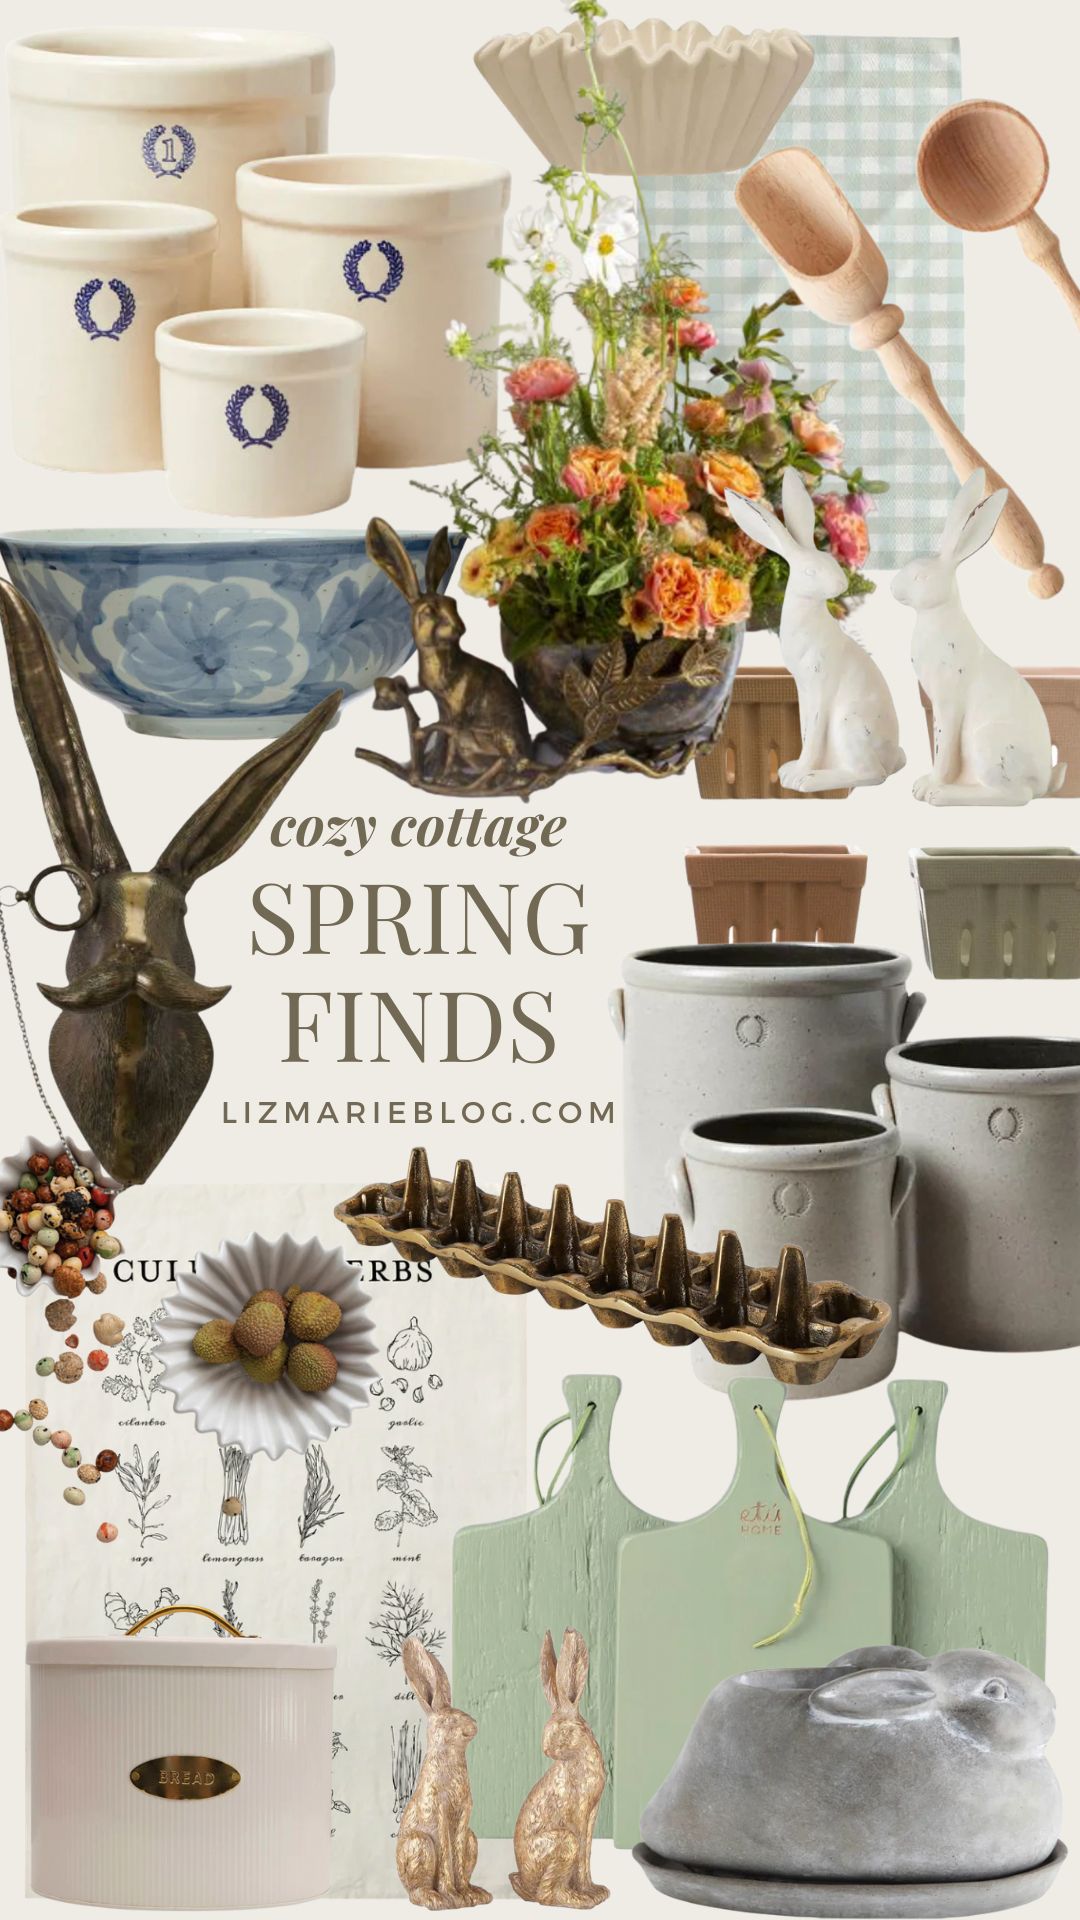 Spring Finds From Pink Antlers- Cozy Cottage Farmhouse Spring Decor